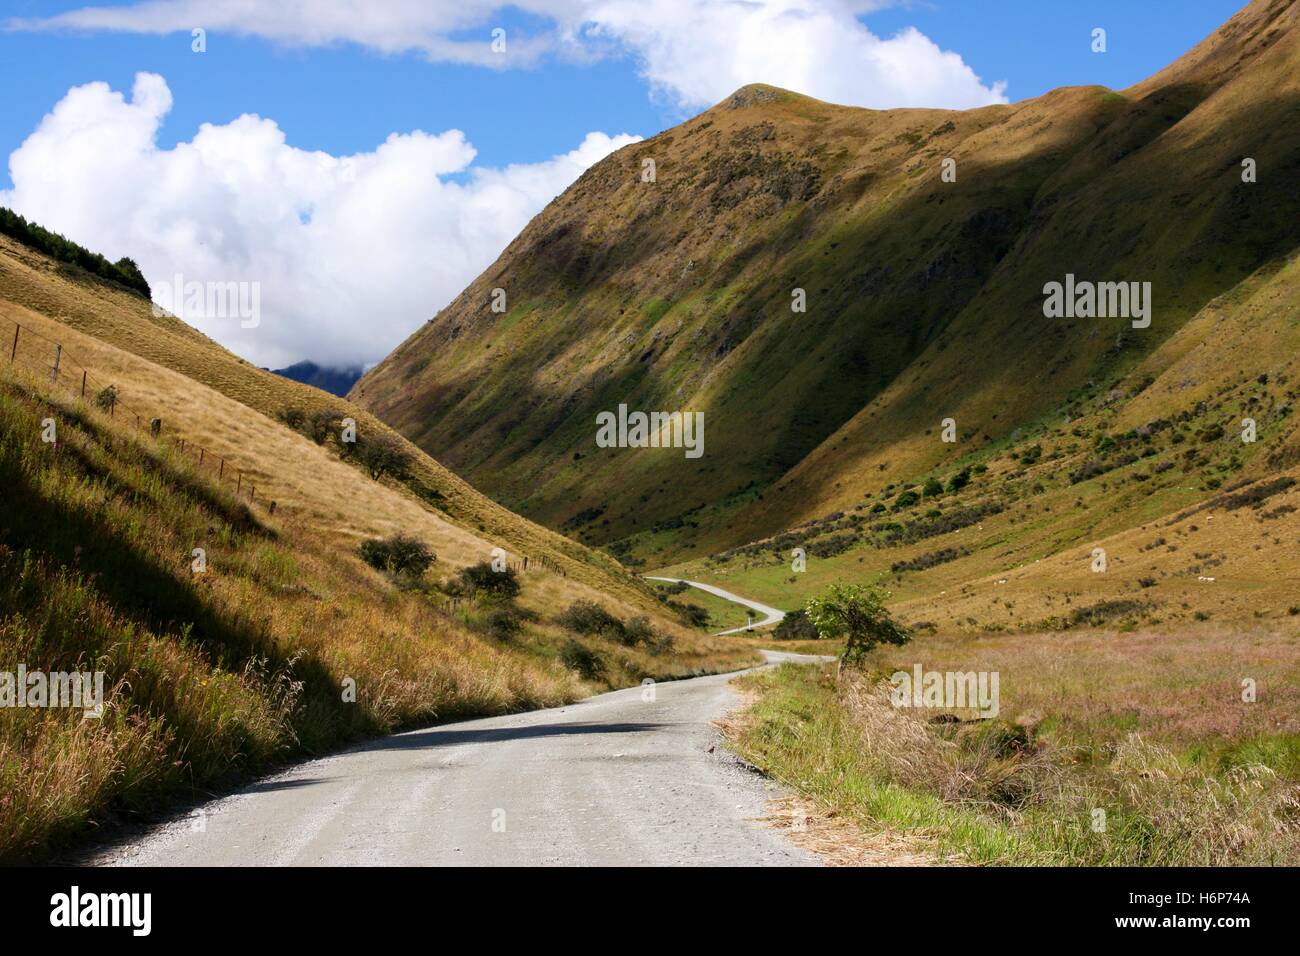 gravel road in the mountains Stock Photo